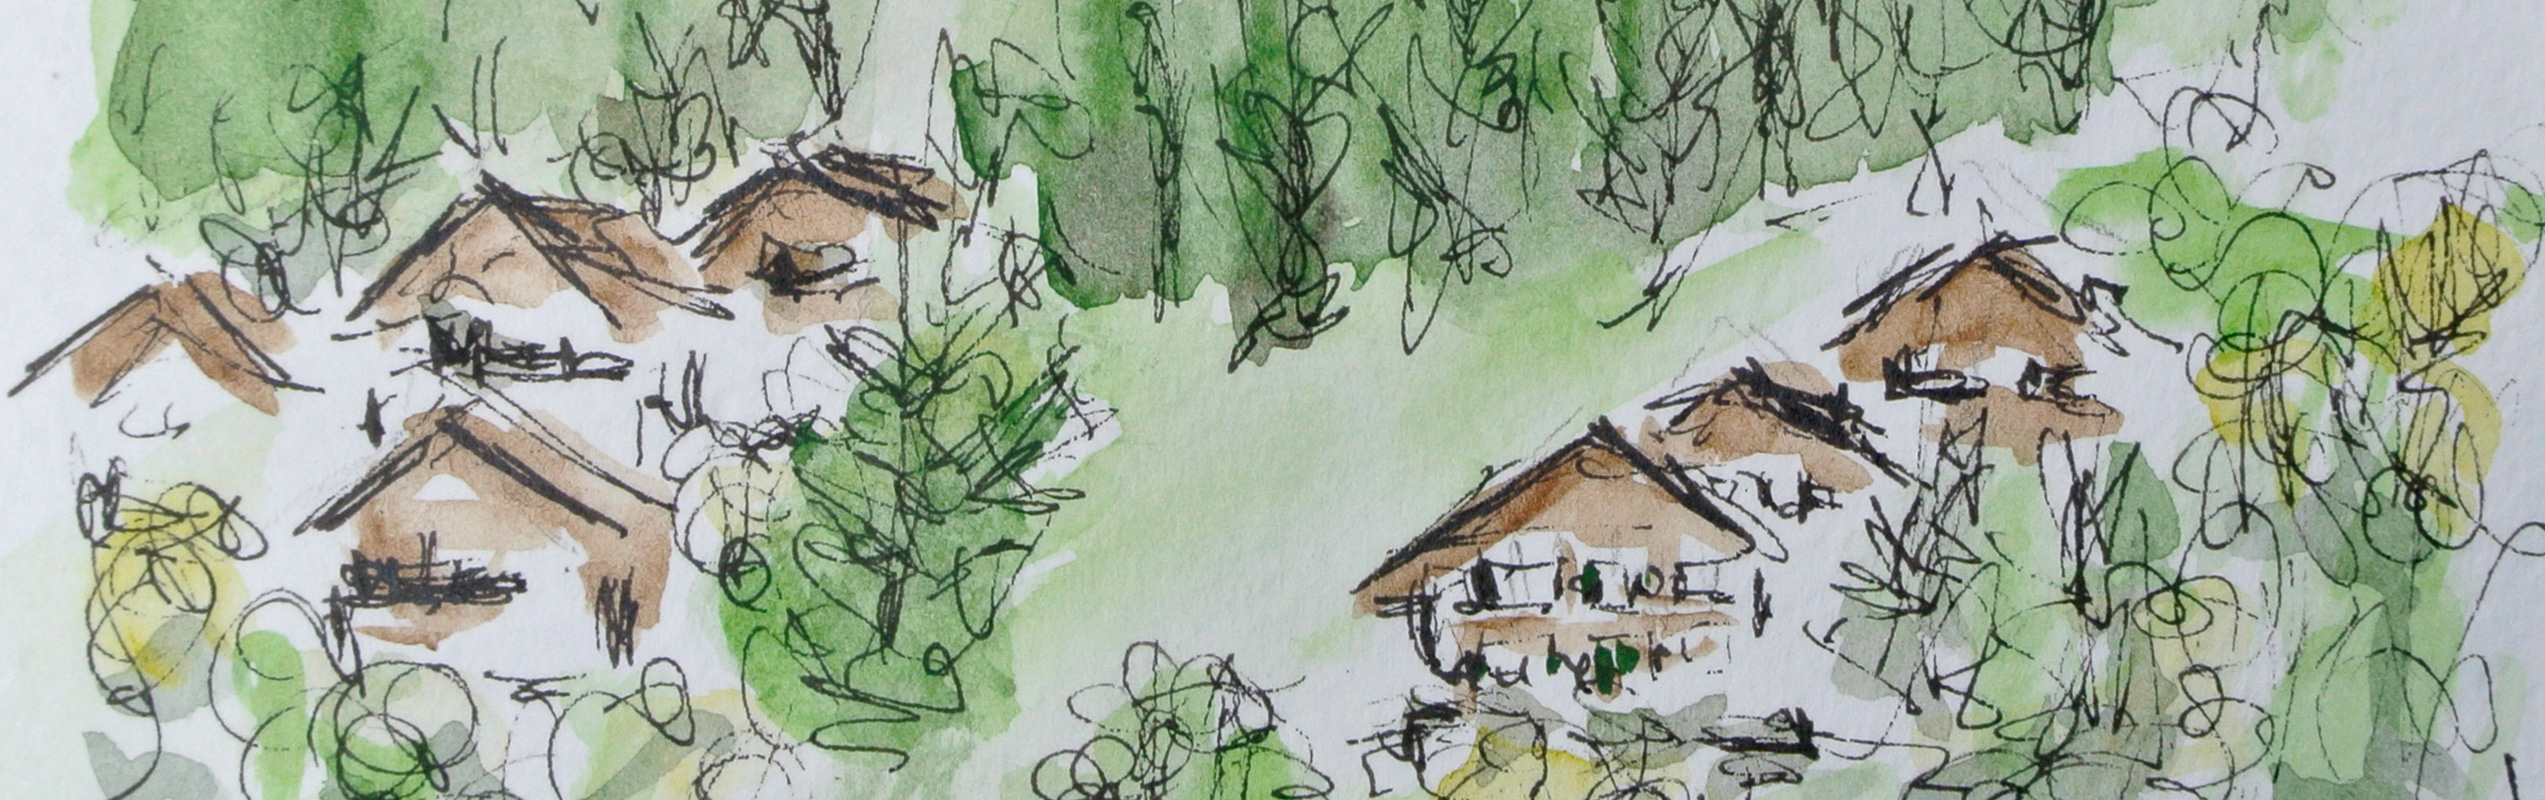 Sketch of houses amongst the trees in Grindelwald, Switzerland